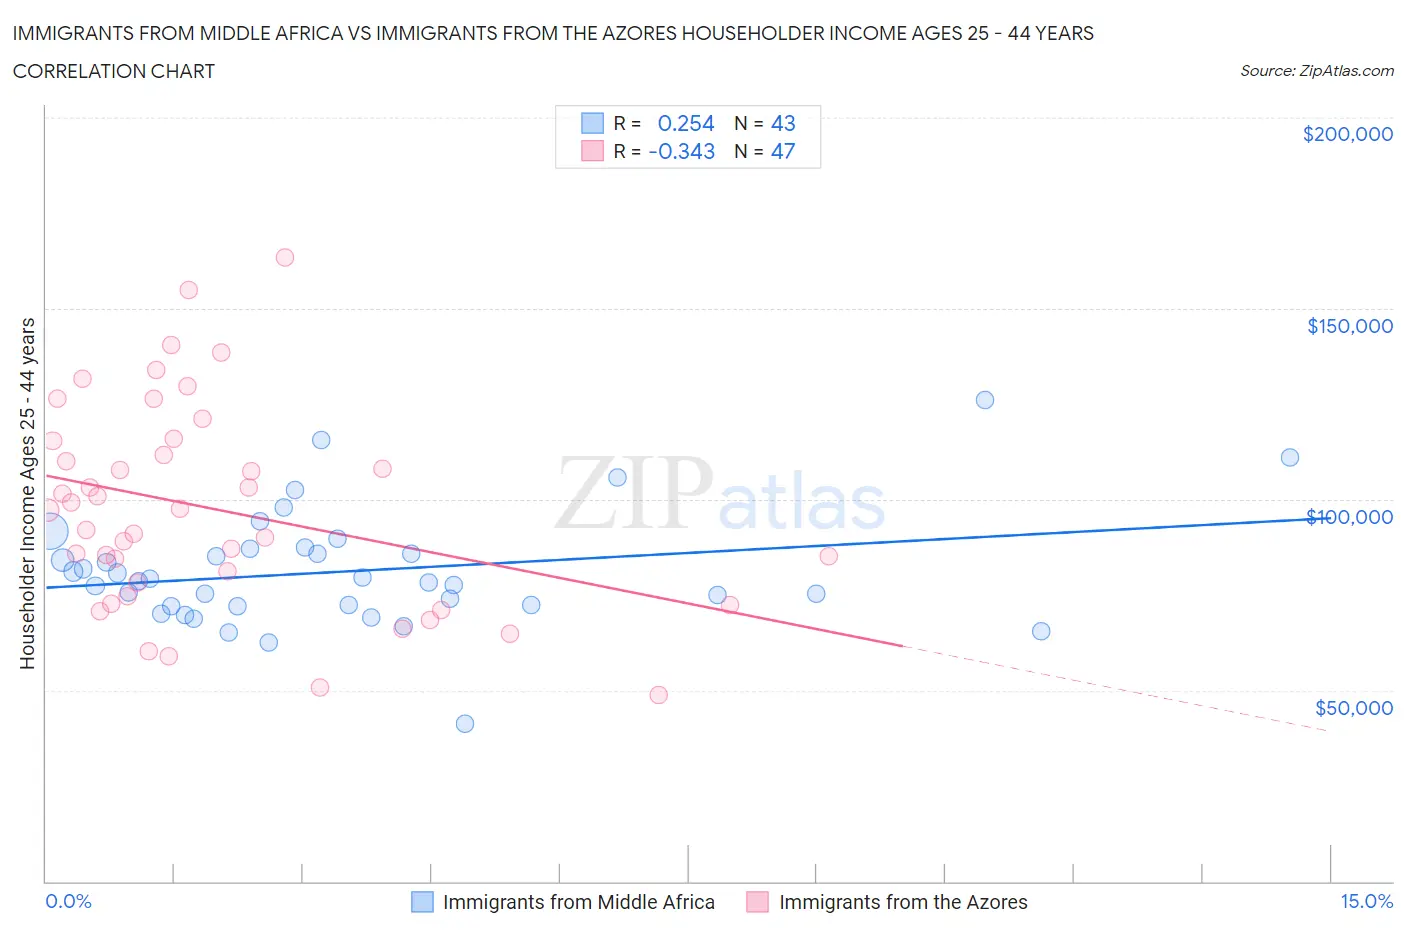 Immigrants from Middle Africa vs Immigrants from the Azores Householder Income Ages 25 - 44 years